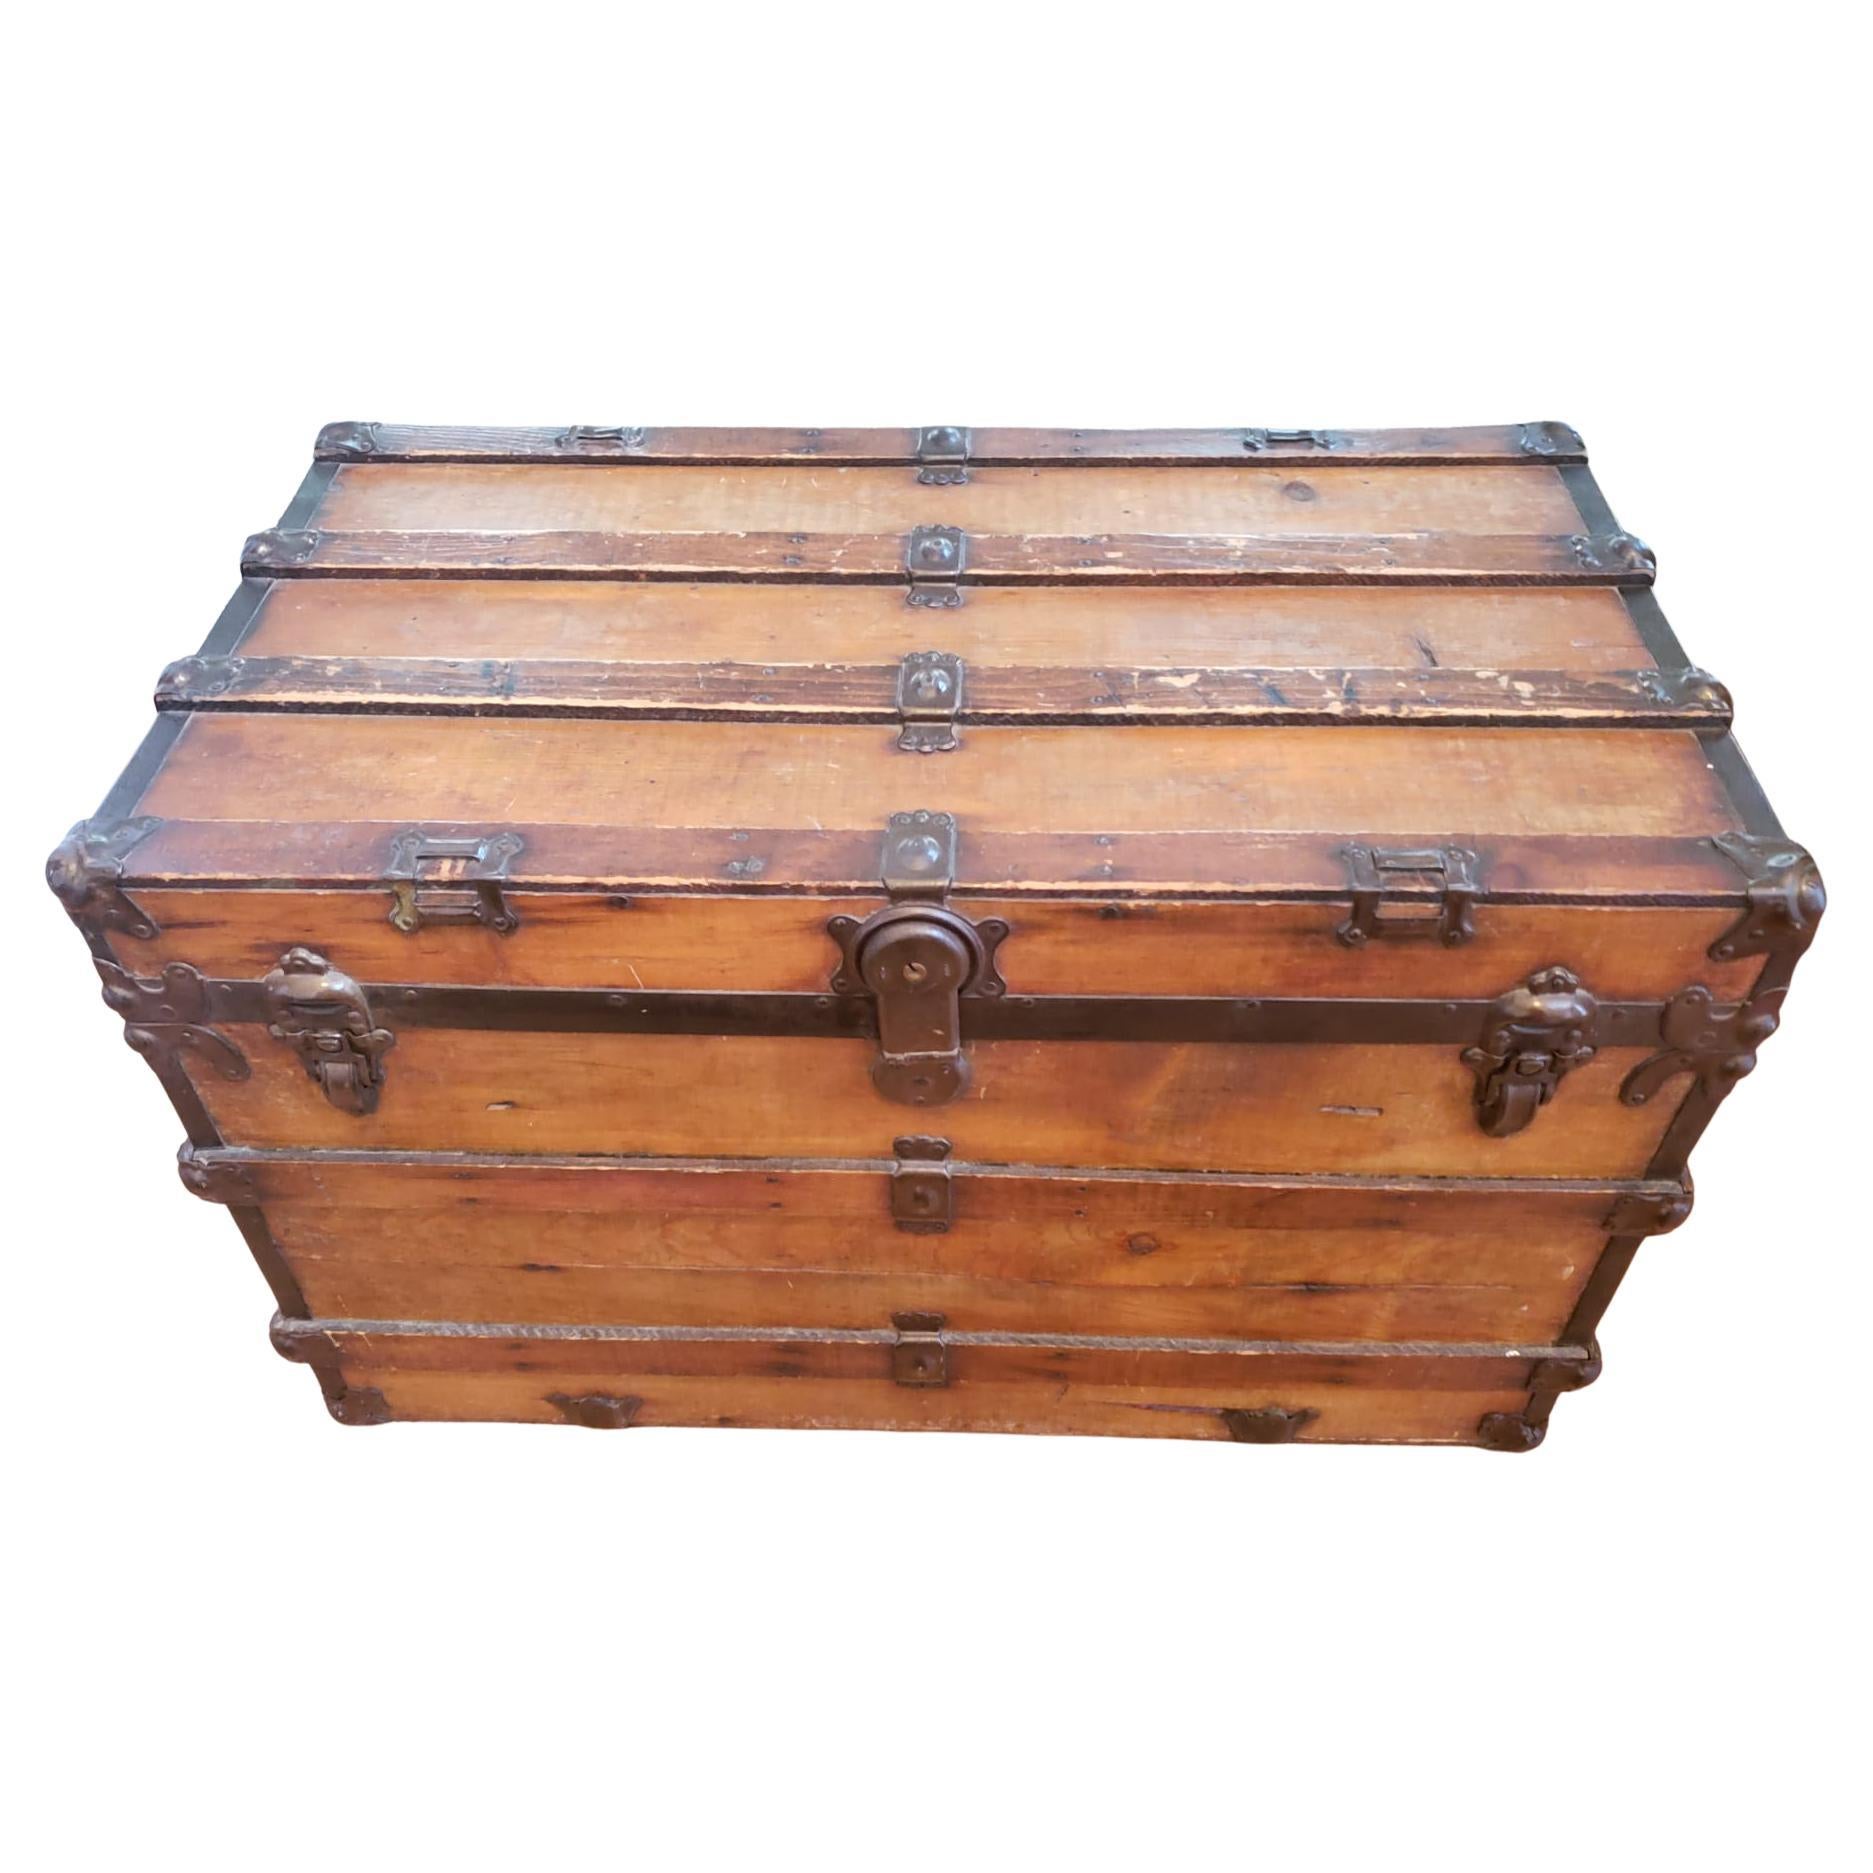 1930s American Classical trunk. Good vintage condition. Leather handles functional and in great shape. Lock not functional. Wear consistent with age and use. Lock not functuinal
Measures 36